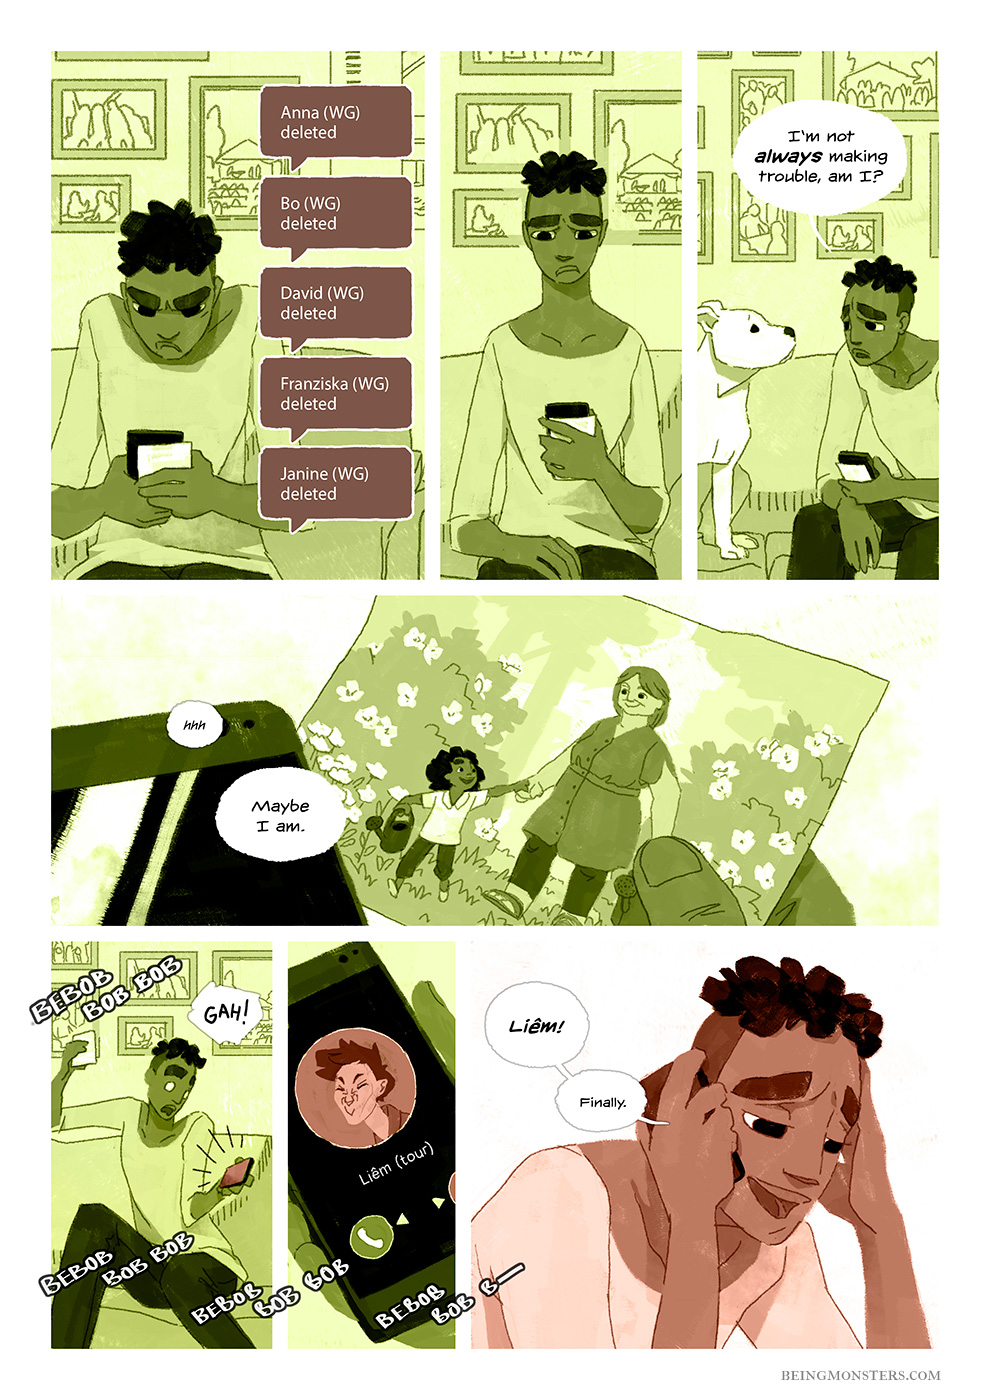 Being Monsters Book 1 Chapter 1 page 18 EN